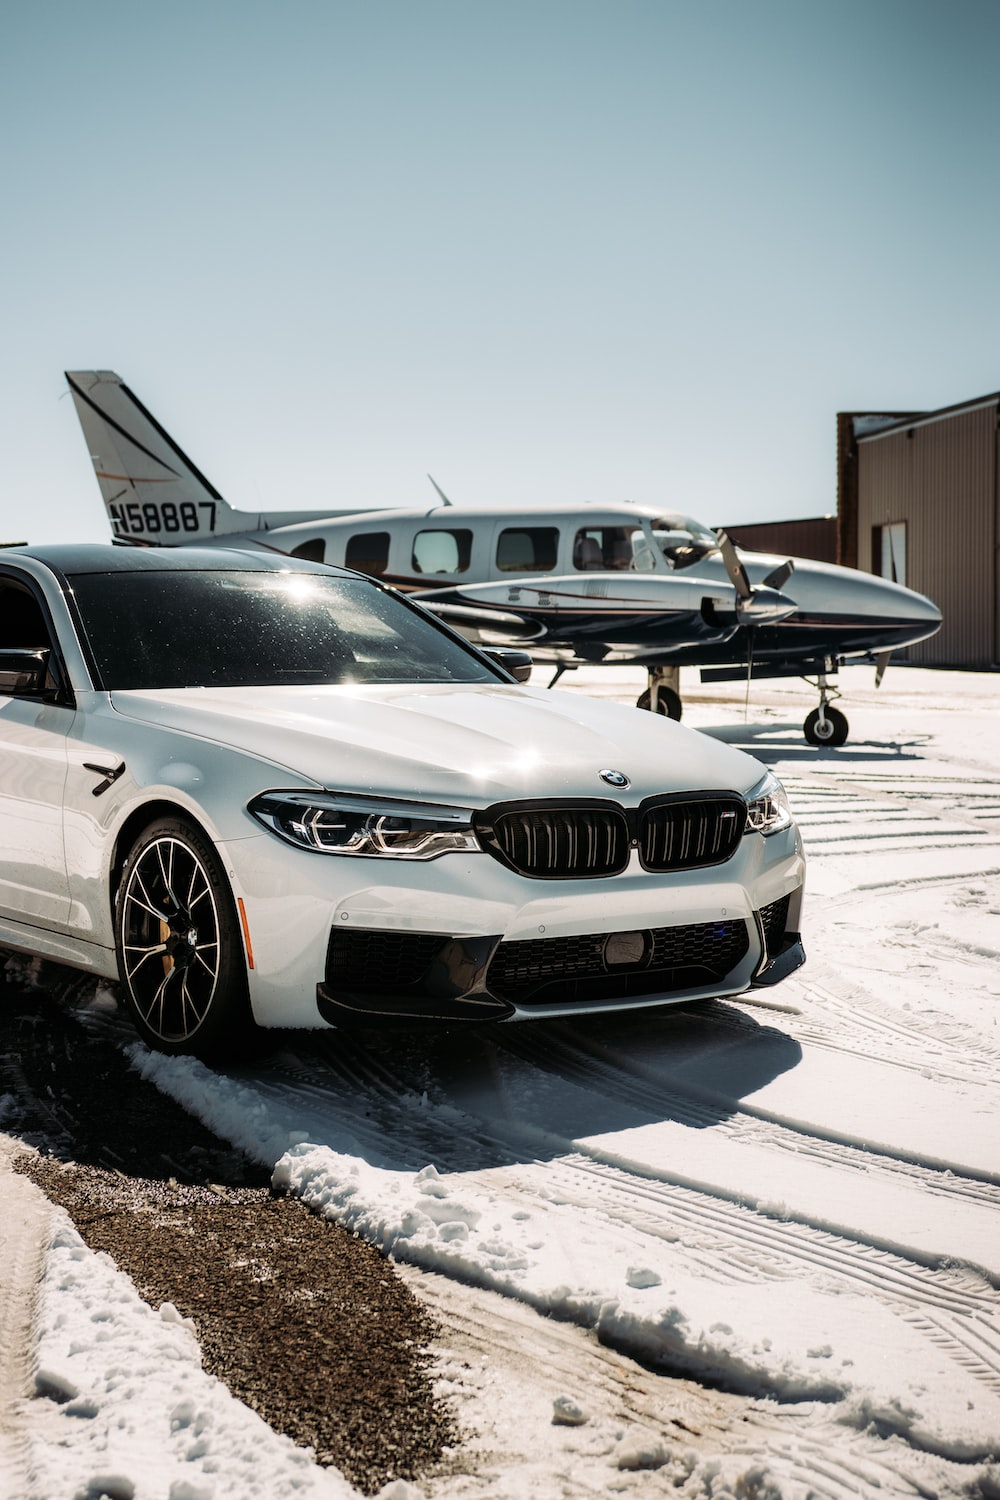 Bmw M5 Picture. Download Free Image